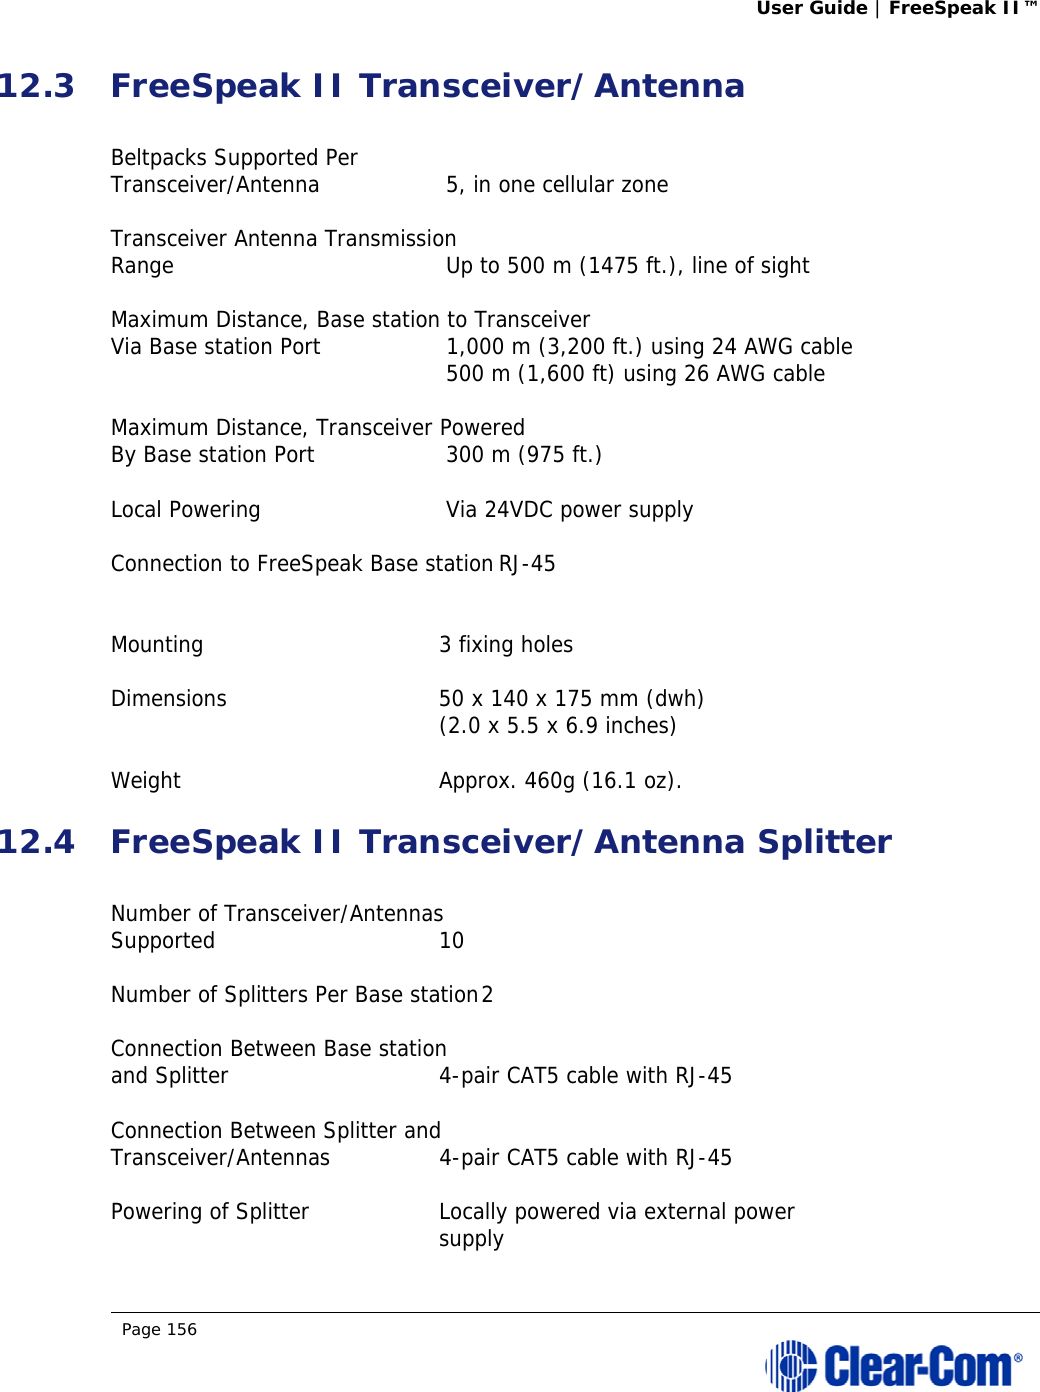 User Guide | FreeSpeak II™  Page 156  12.3 FreeSpeak II Transceiver/Antenna  Beltpacks Supported Per  Transceiver/Antenna   5, in one cellular zone  Transceiver Antenna Transmission  Range   Up to 500 m (1475 ft.), line of sight  Maximum Distance, Base station to Transceiver  Via Base station Port   1,000 m (3,200 ft.) using 24 AWG cable     500 m (1,600 ft) using 26 AWG cable  Maximum Distance, Transceiver Powered  By Base station Port   300 m (975 ft.)  Local Powering   Via 24VDC power supply  Connection to FreeSpeak Base station RJ-45   Mounting  3 fixing holes  Dimensions  50 x 140 x 175 mm (dwh)   (2.0 x 5.5 x 6.9 inches)   Weight  Approx. 460g (16.1 oz). 12.4 FreeSpeak II Transceiver/Antenna Splitter  Number of Transceiver/Antennas  Supported 10  Number of Splitters Per Base station 2  Connection Between Base station  and Splitter  4-pair CAT5 cable with RJ-45  Connection Between Splitter and  Transceiver/Antennas  4-pair CAT5 cable with RJ-45  Powering of Splitter  Locally powered via external power  supply 